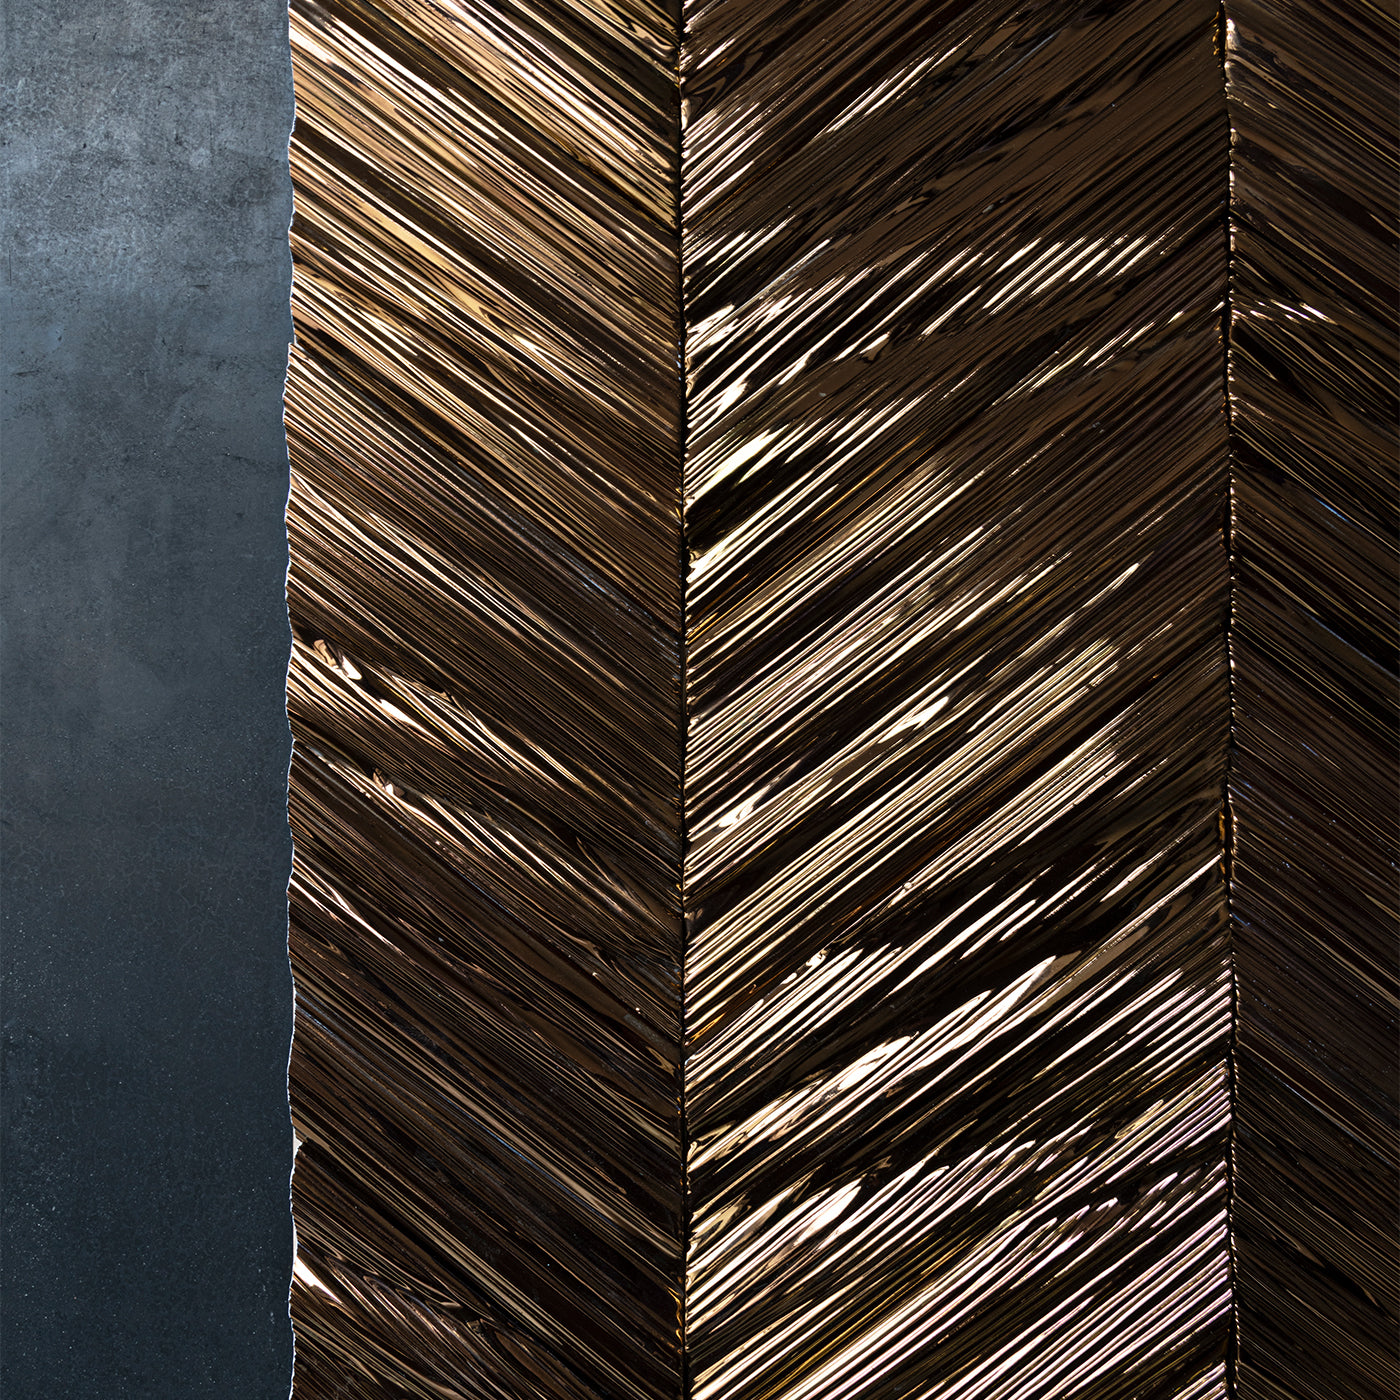 Calipso Bronzed Wall Covering by Giacomo Totti - Alternative view 1